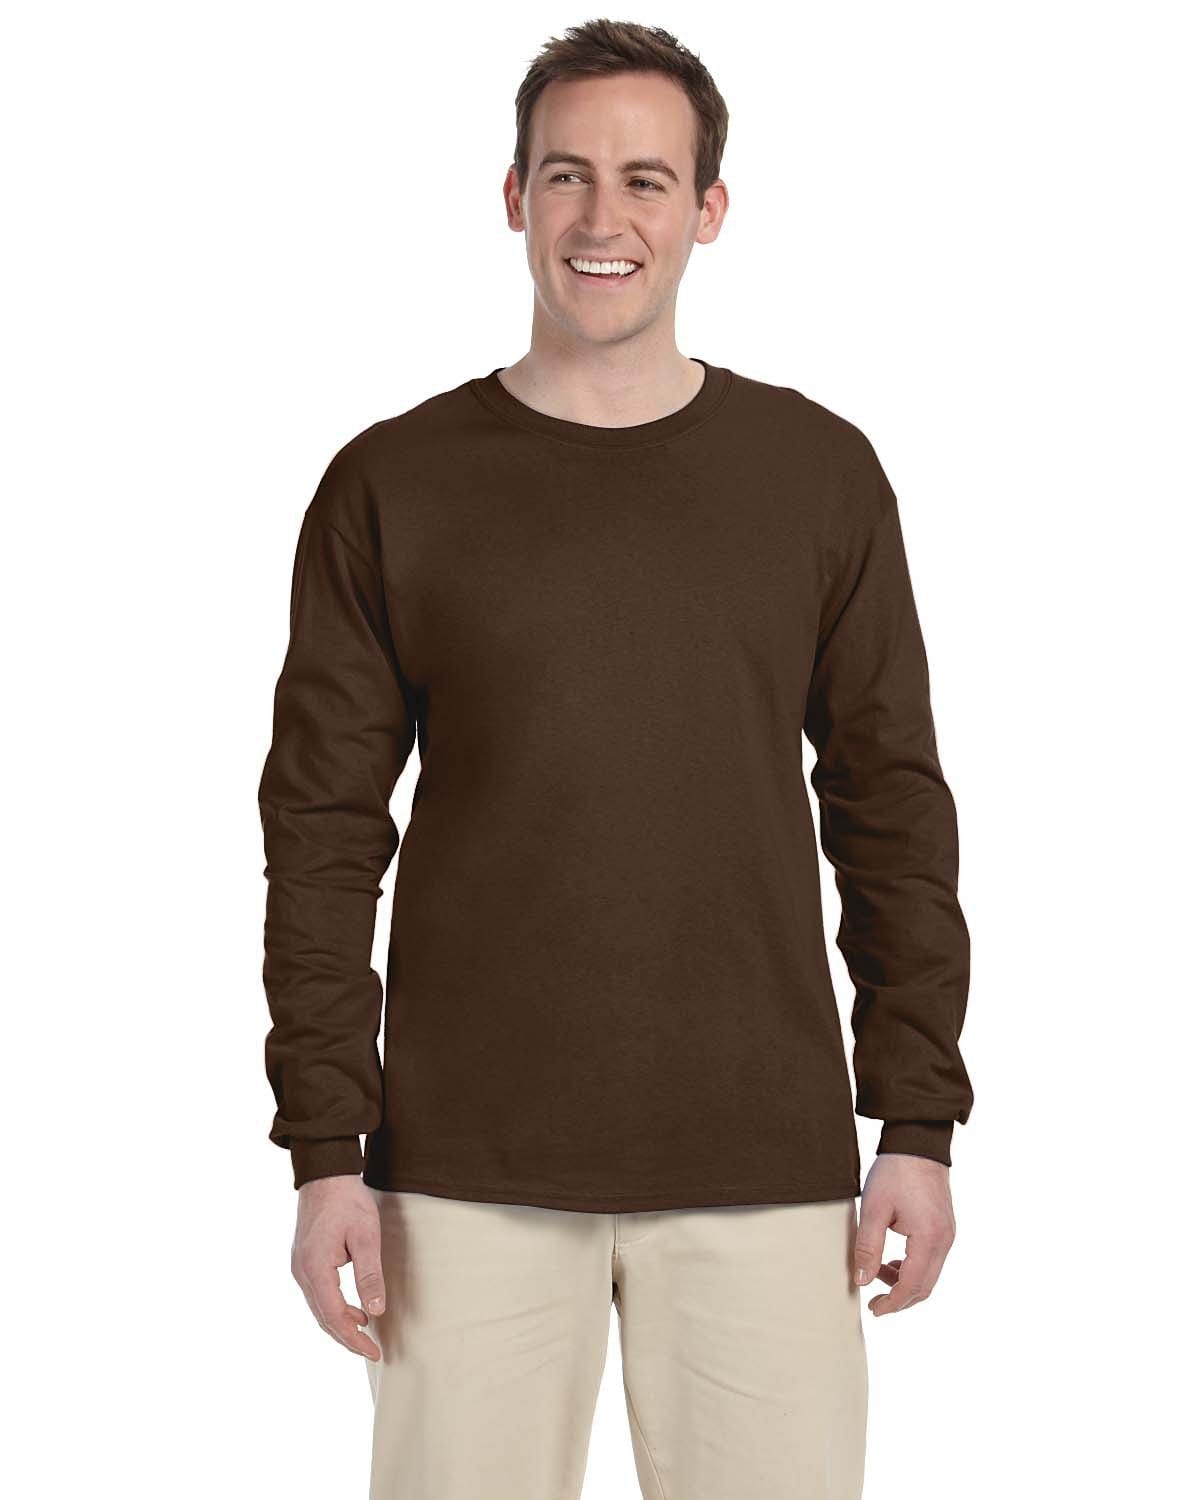 Fruit of the Loom Long Sleeve T Shirts CheapesTees